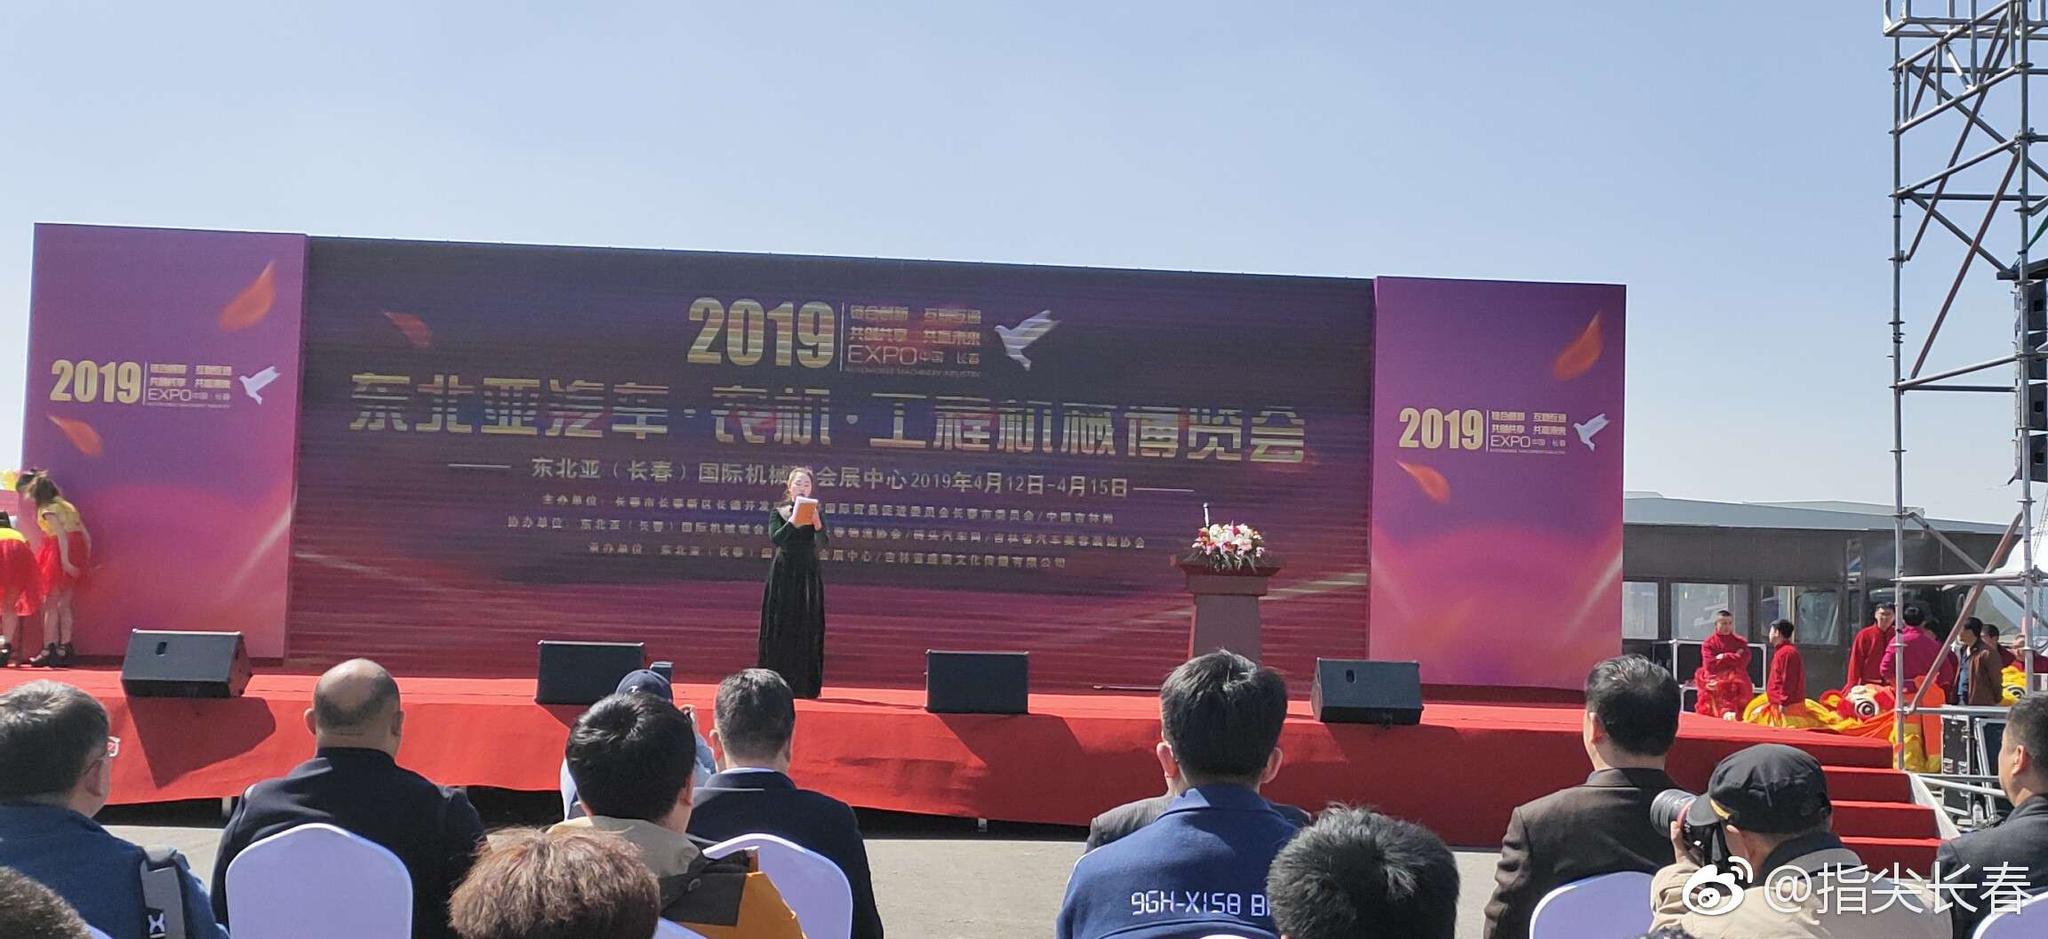 2019 Northeast Asia Automobile. Agricultural Machinery. Construction Machinery Expo opened today in Changchun